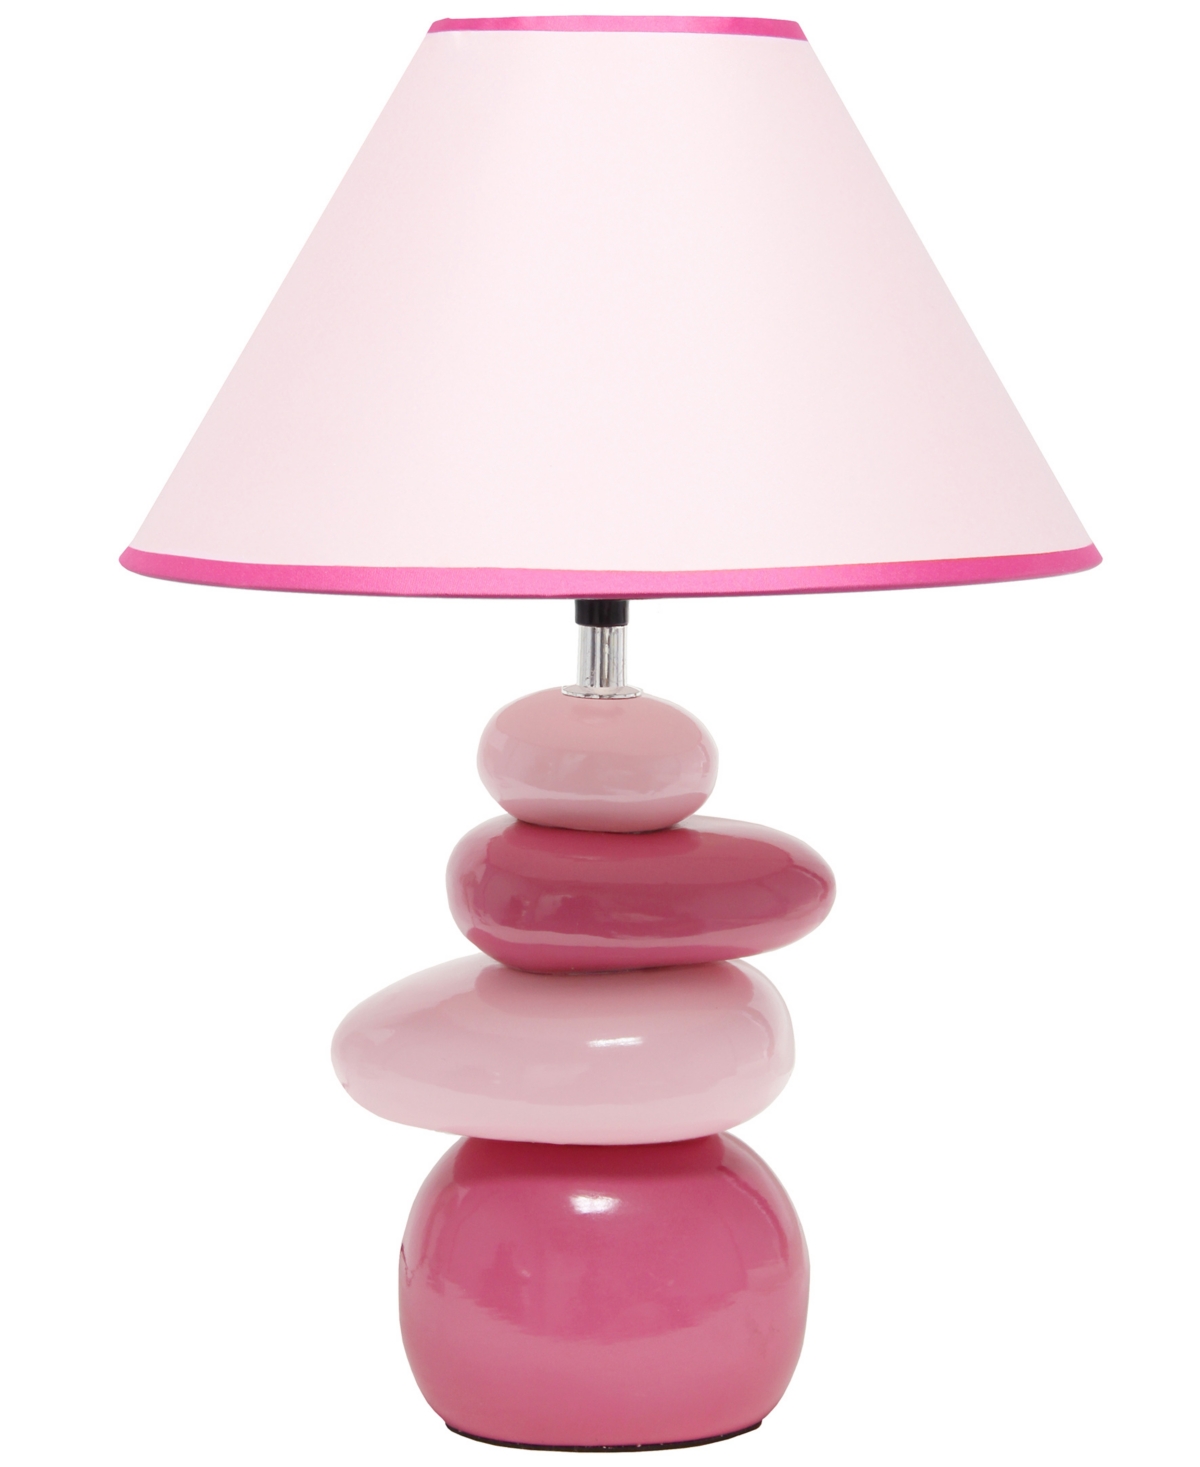 Shop Creekwood Home Priva 17.25" Contemporary Ceramic Stacking Stones Table Desk Lamp In Pink